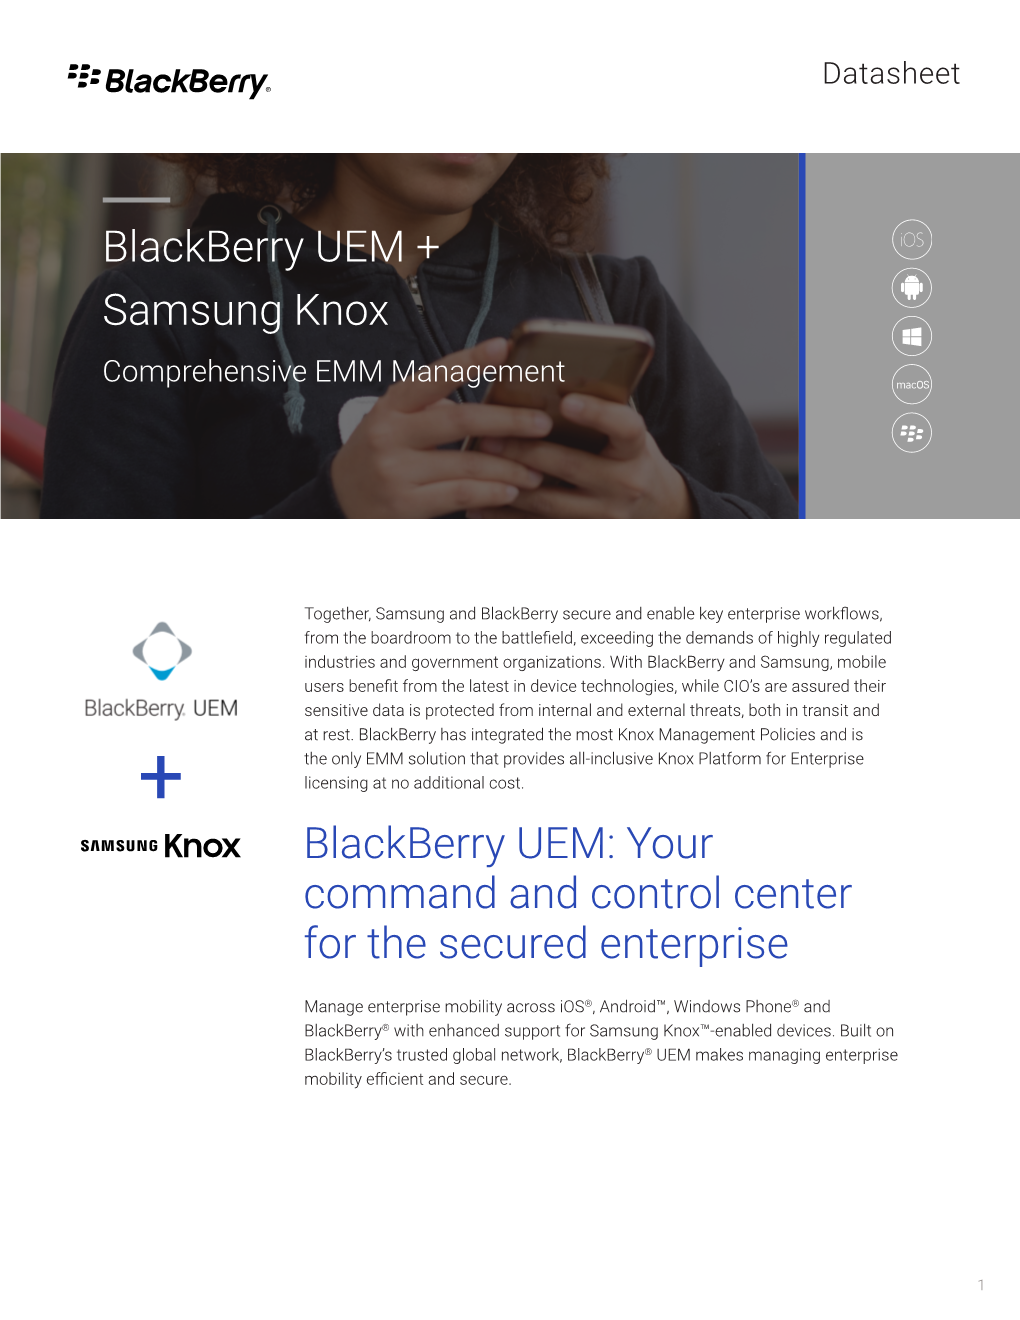 Your Command and Control Center for the Secured Enterprise Blackberry UEM + Samsung Knox